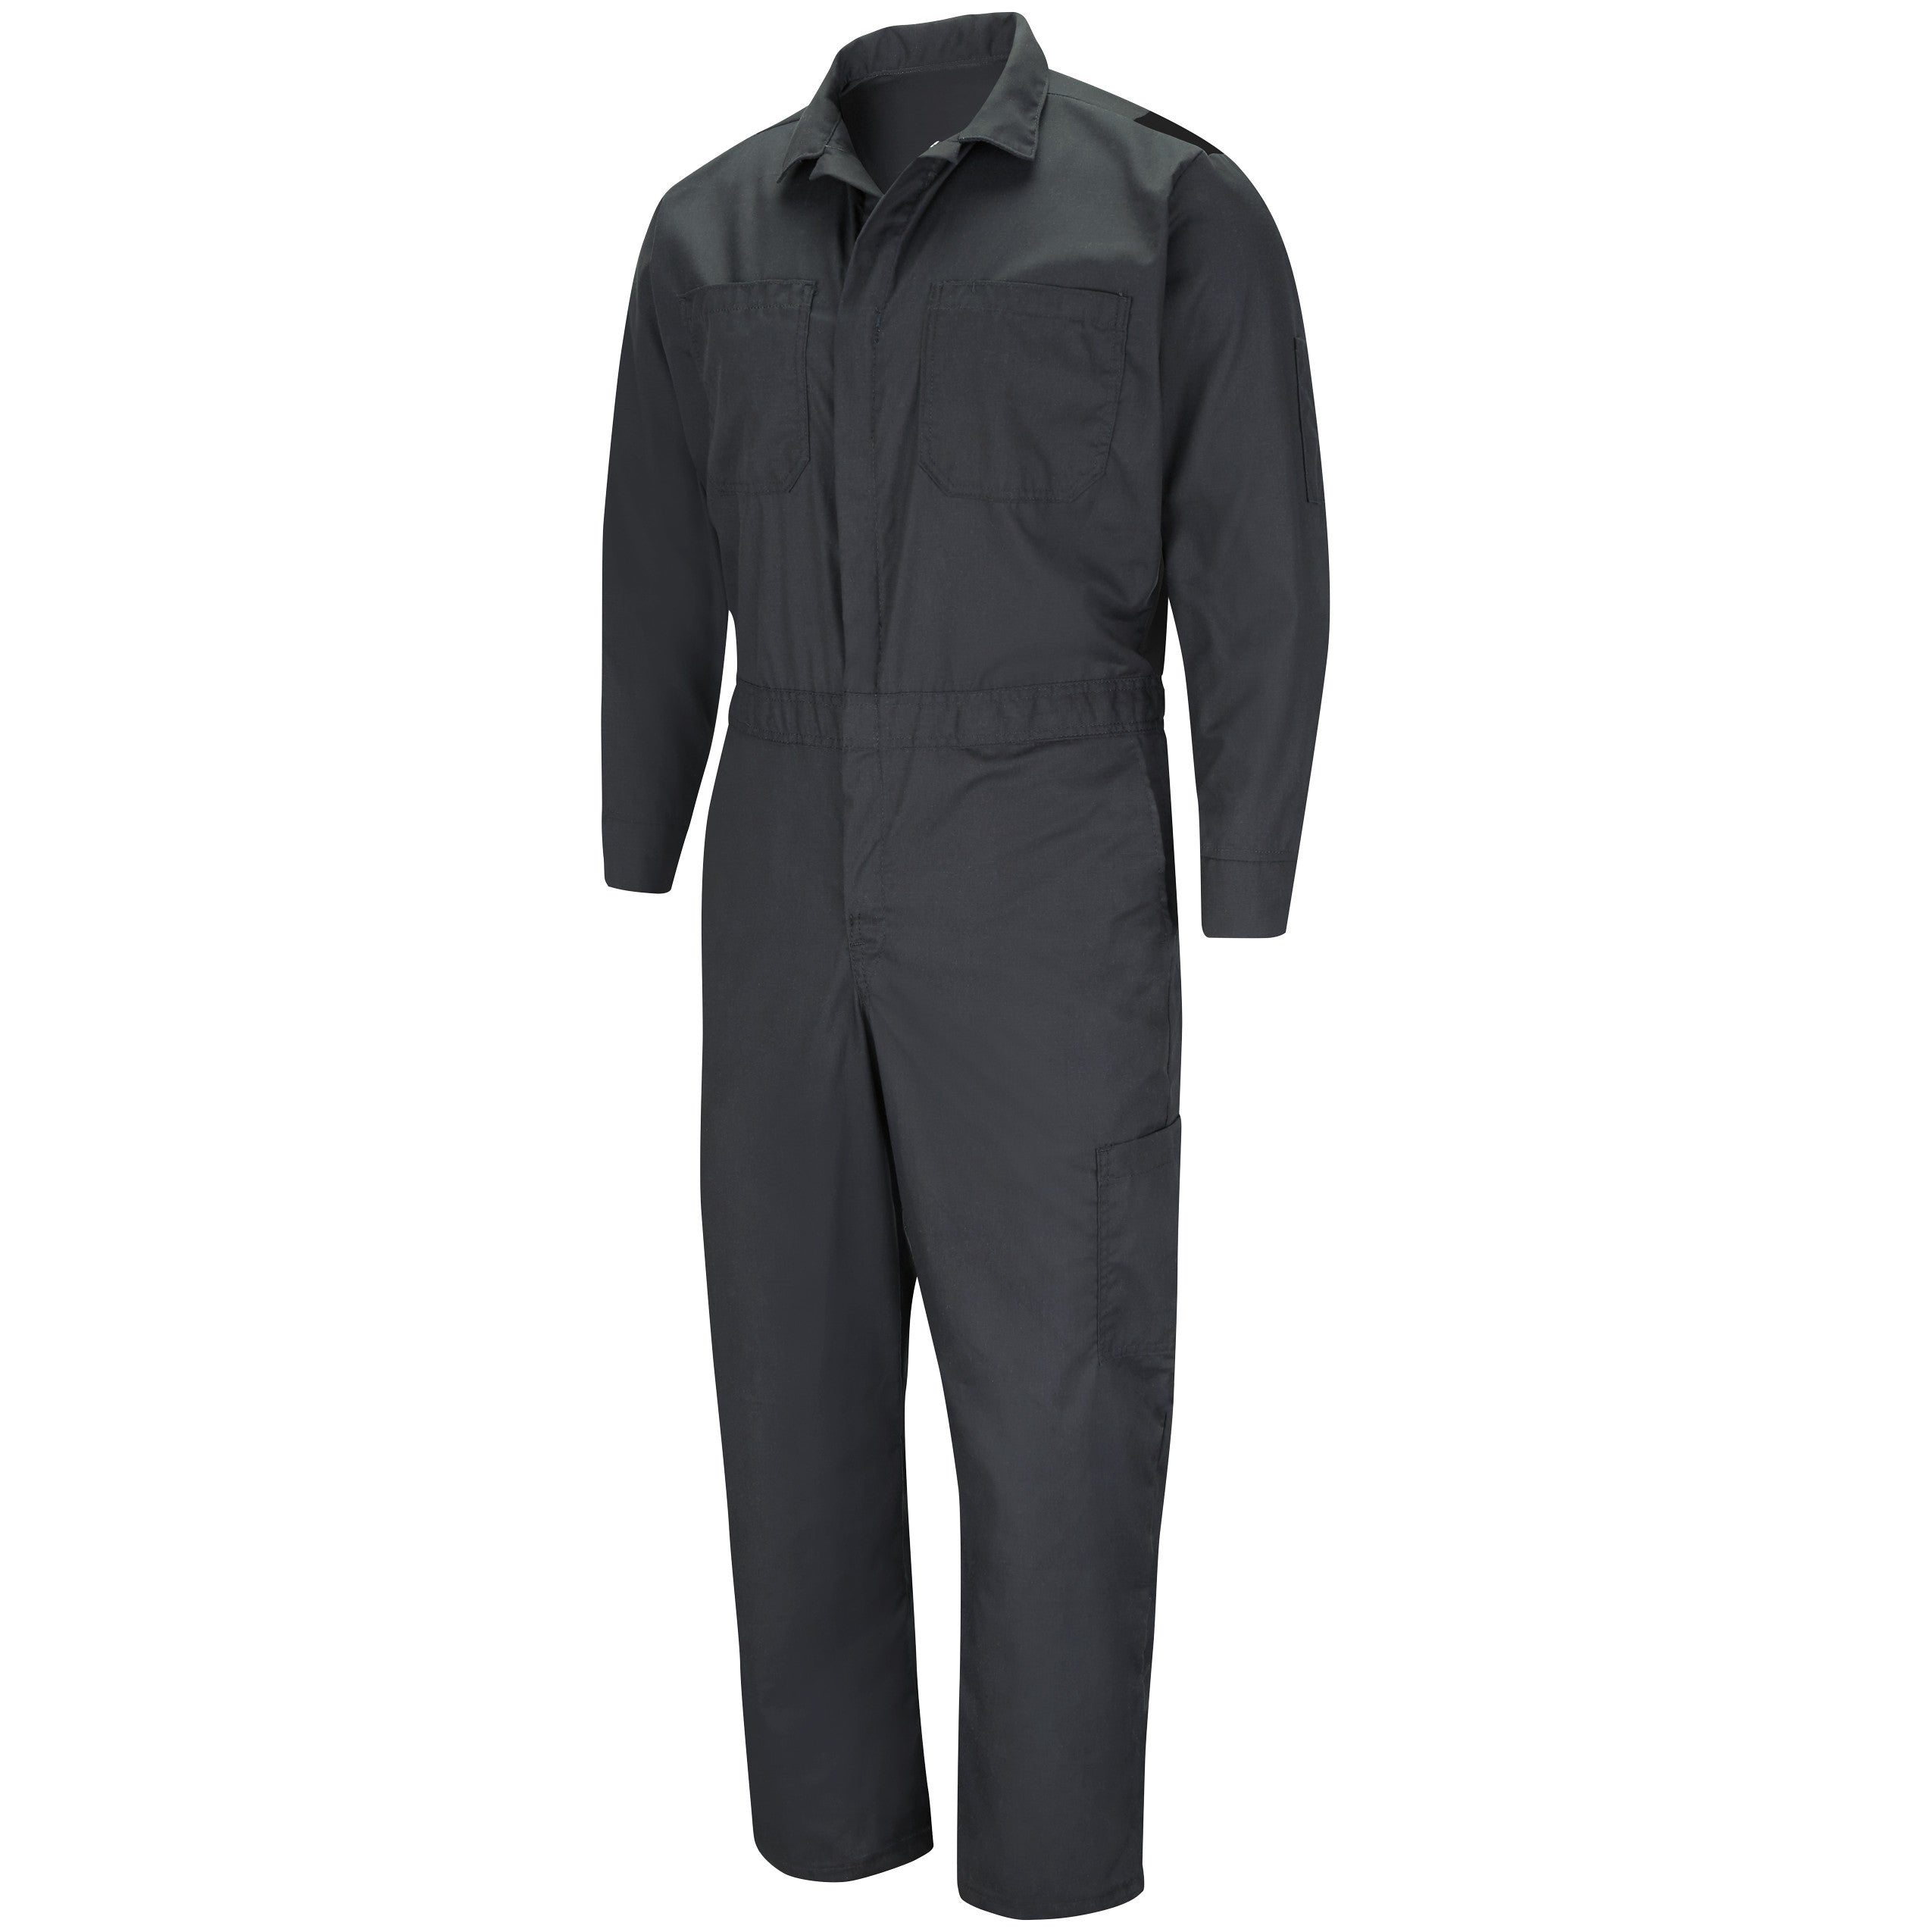 Red Kap Performance Plus Lightweight Coverall with OilBlok Technology